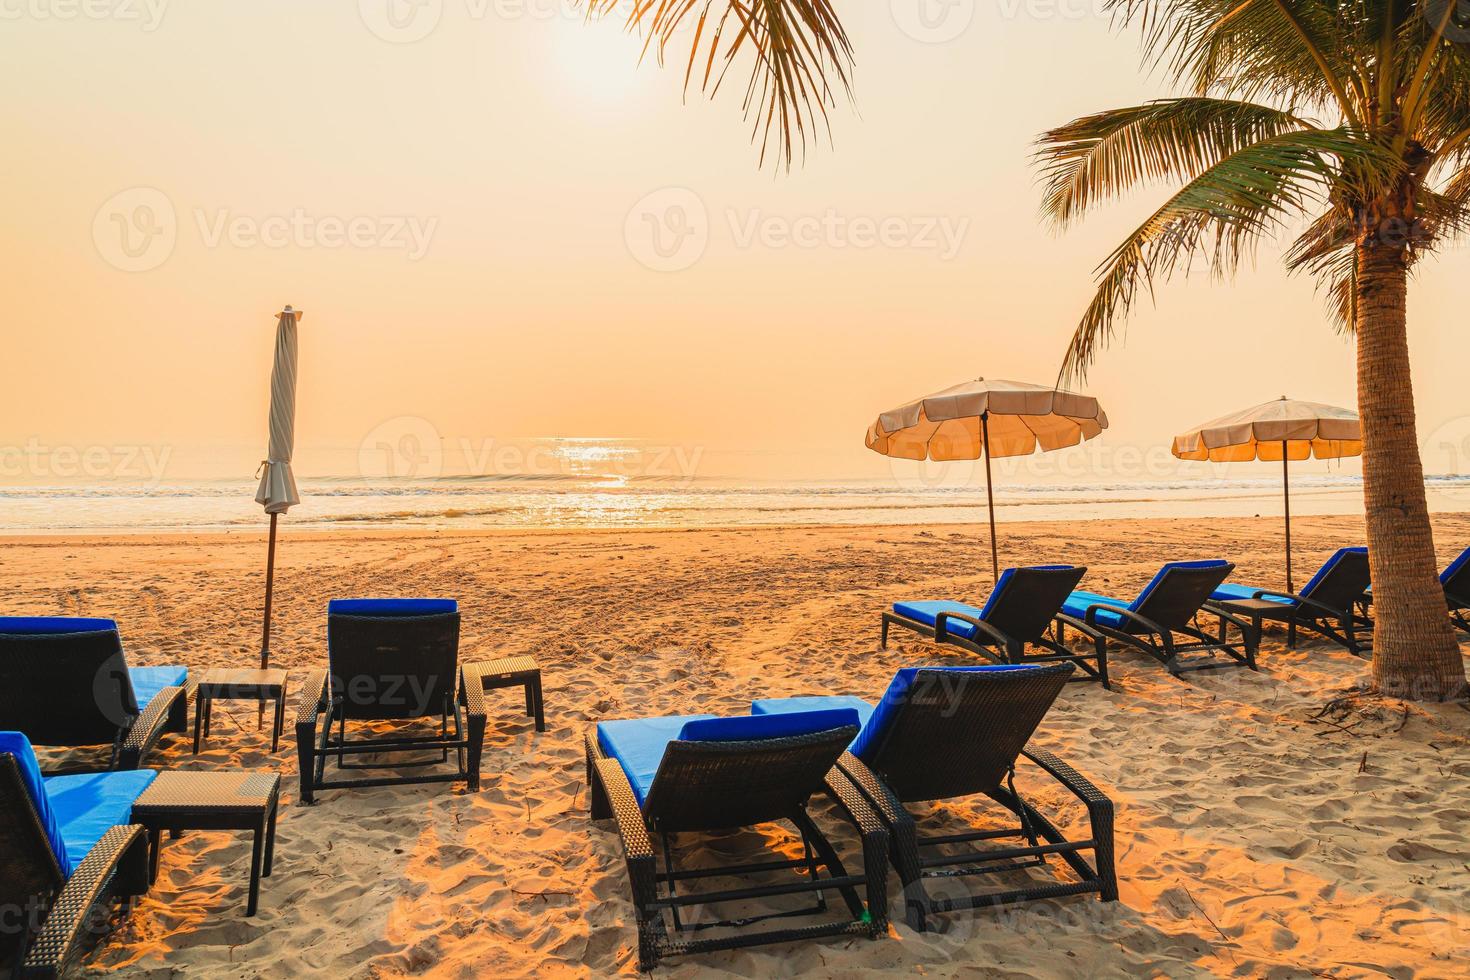 Umbrella beach chair with palm tree and sea beach at sunrise time - vacation and holiday concept photo